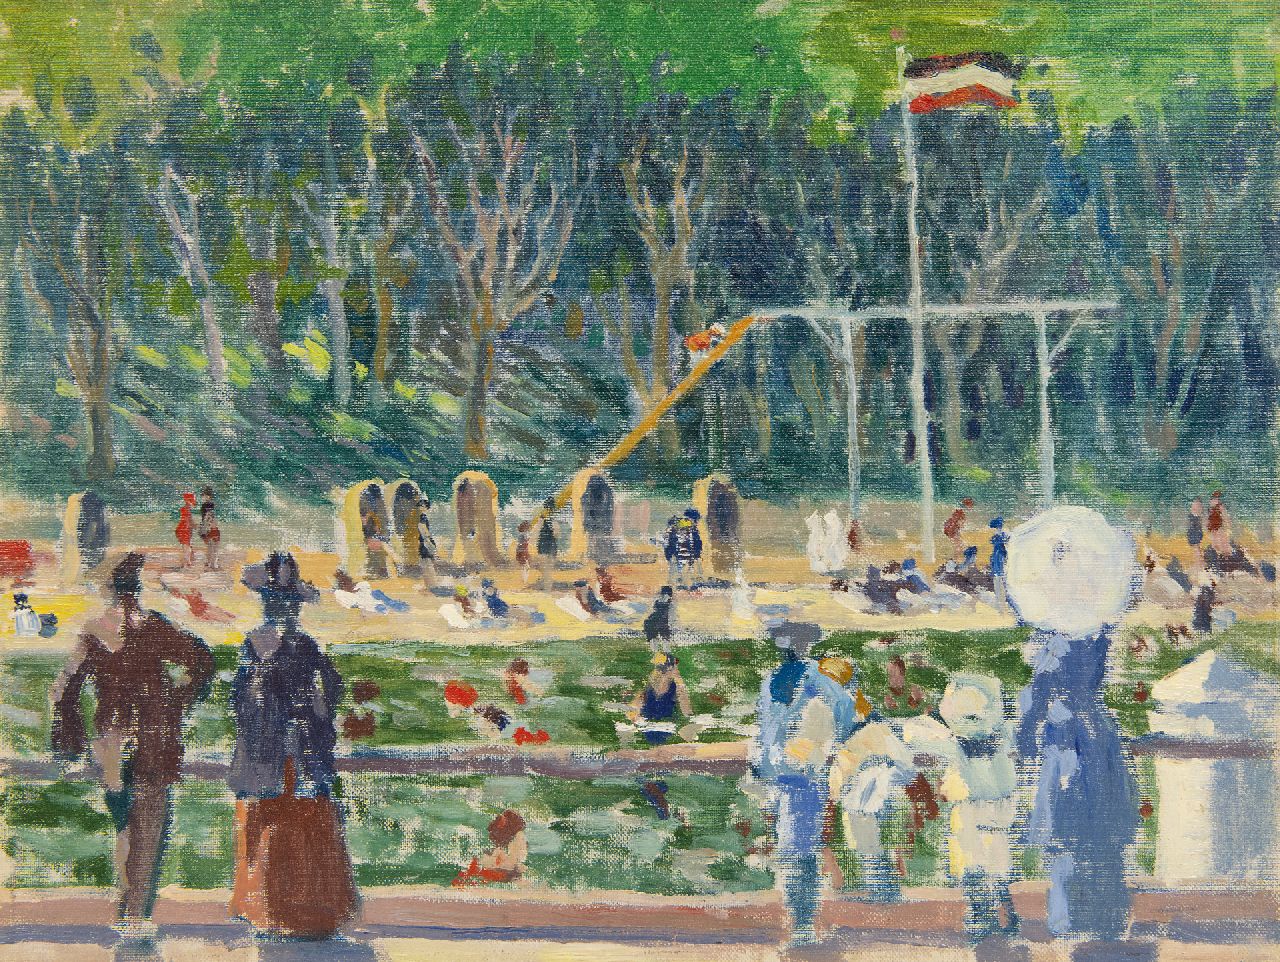 Bloos R.W.  | 'Richard' Willi Bloos | Paintings offered for sale | A sunny day at the beach pool, oil on canvas laid down on painter's board 32.0 x 42.0 cm